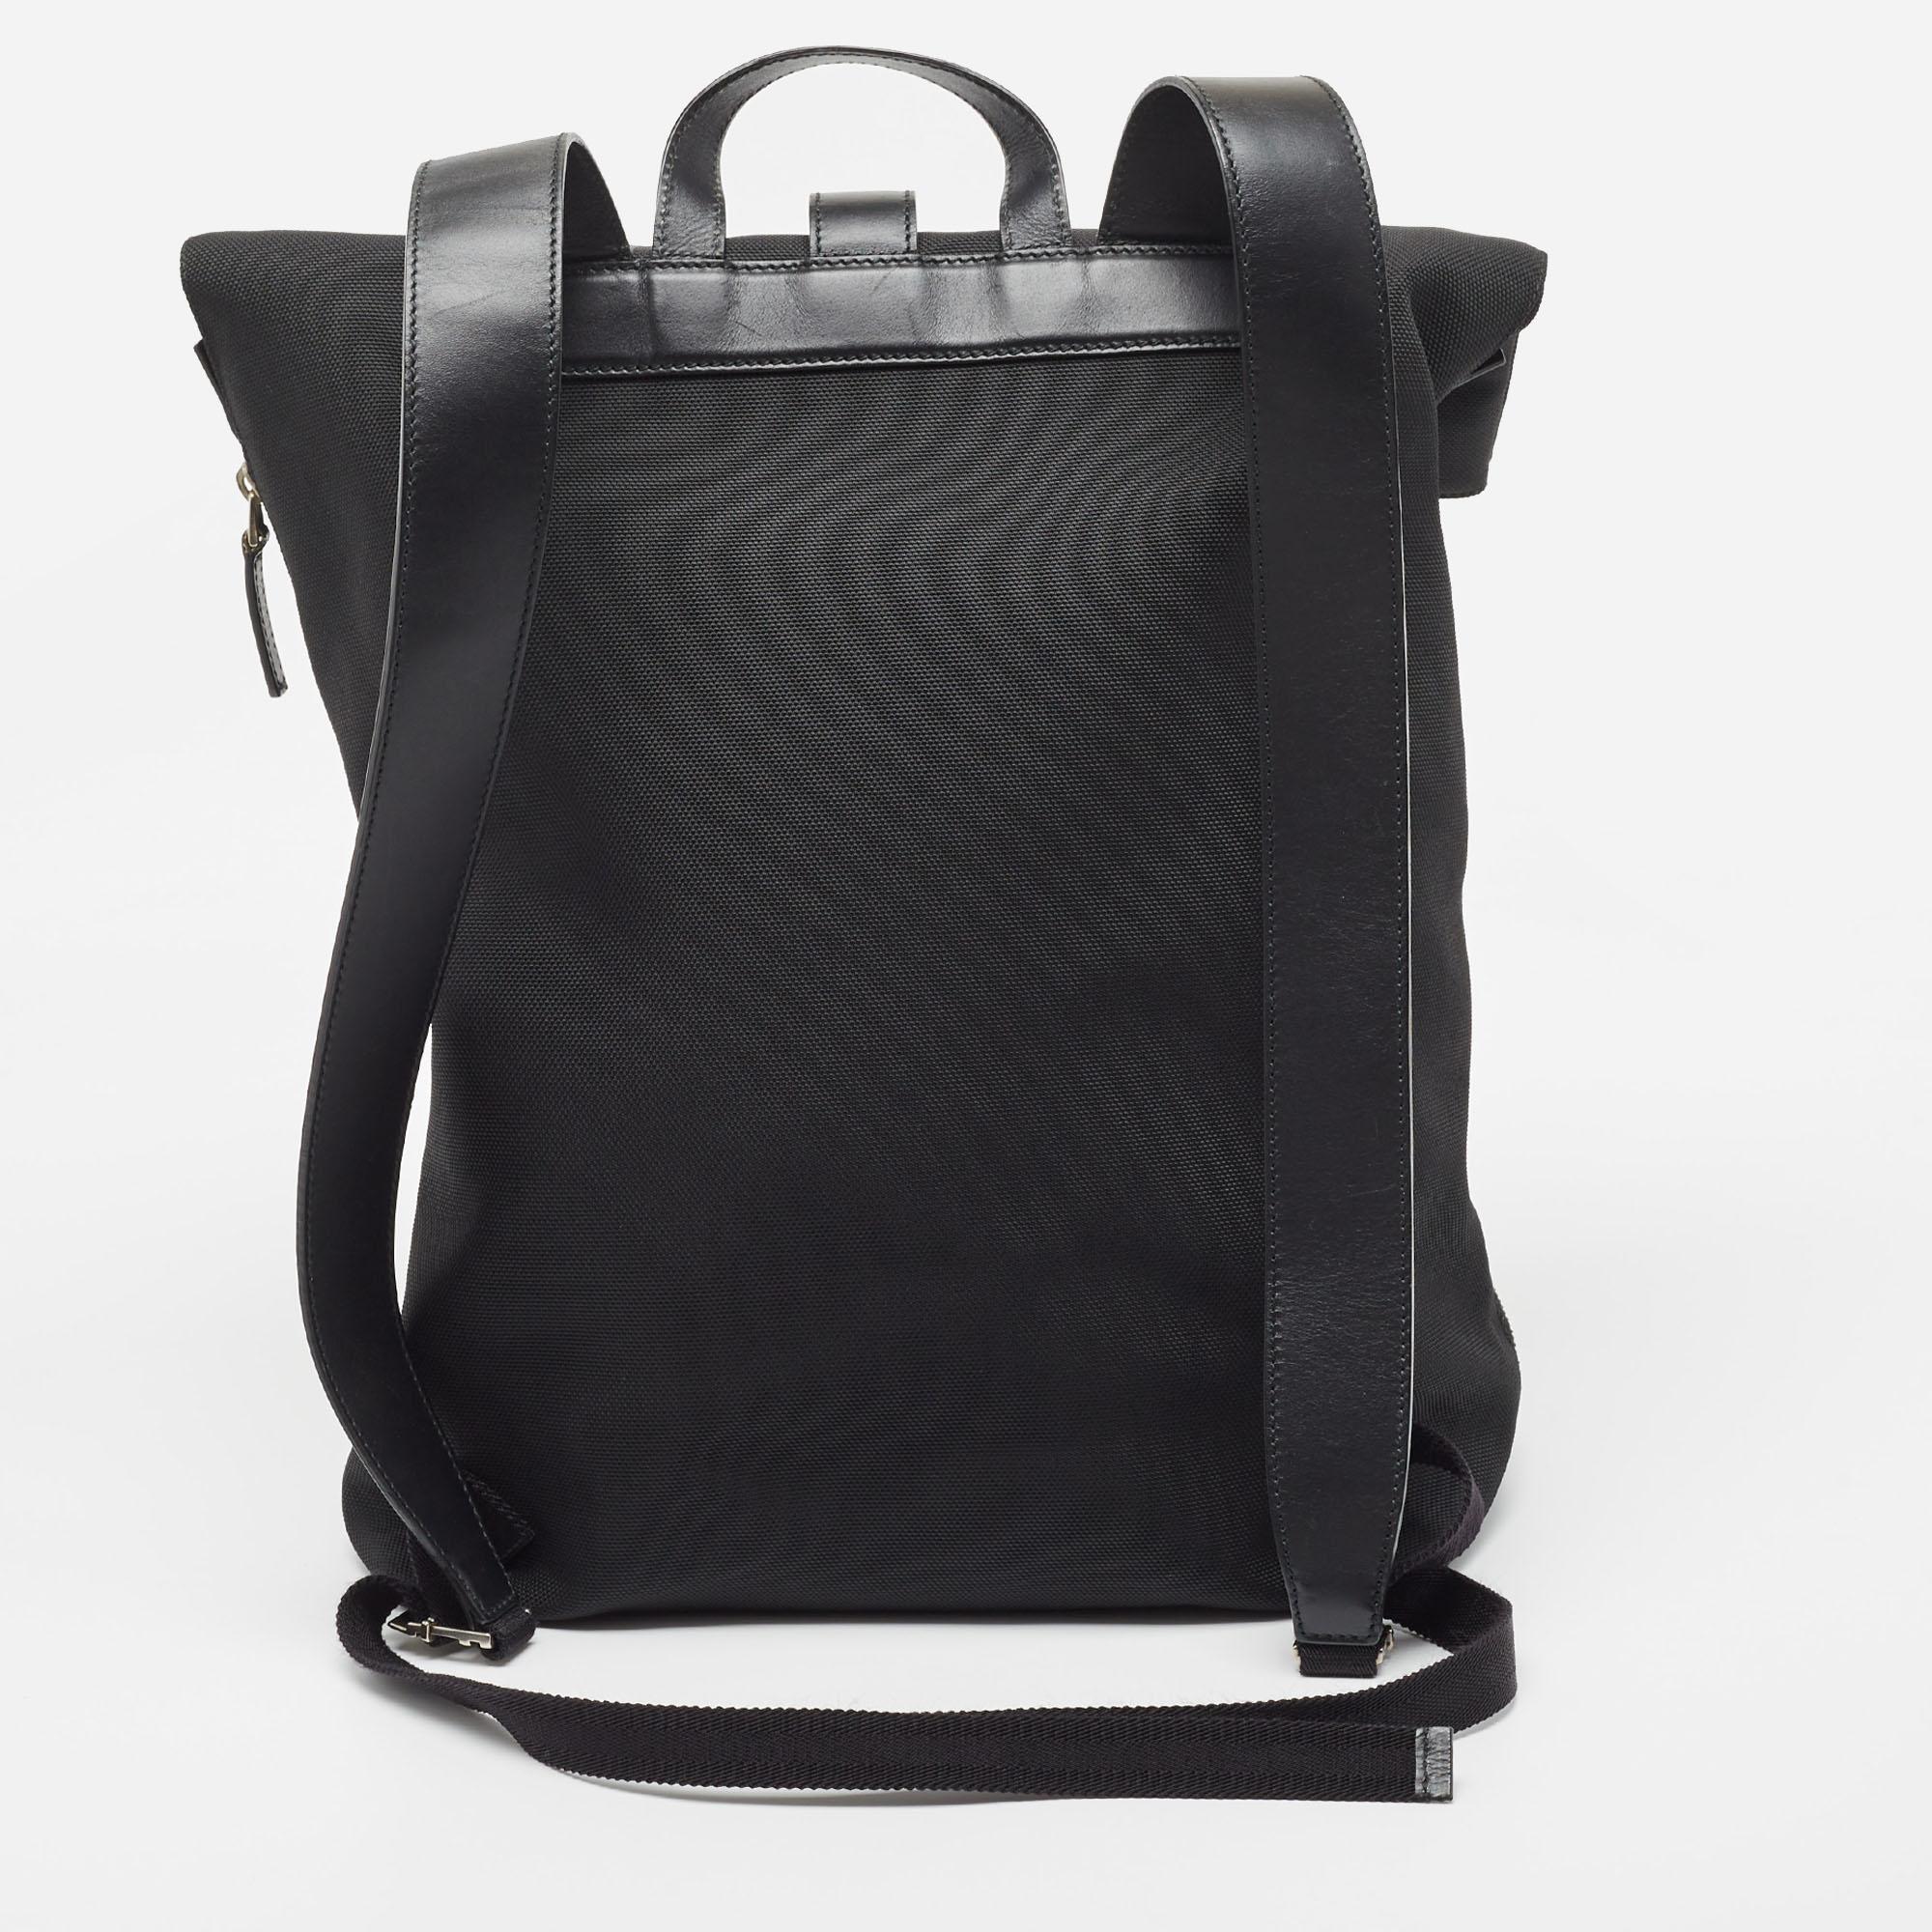 This practical and fashionable Gucci backpack will come in handy for daily use or as a style statement. It is smartly designed with a spacious interior for your belongings. Two shoulder straps make it ready to be yours.

Includes: Original Dustbag,